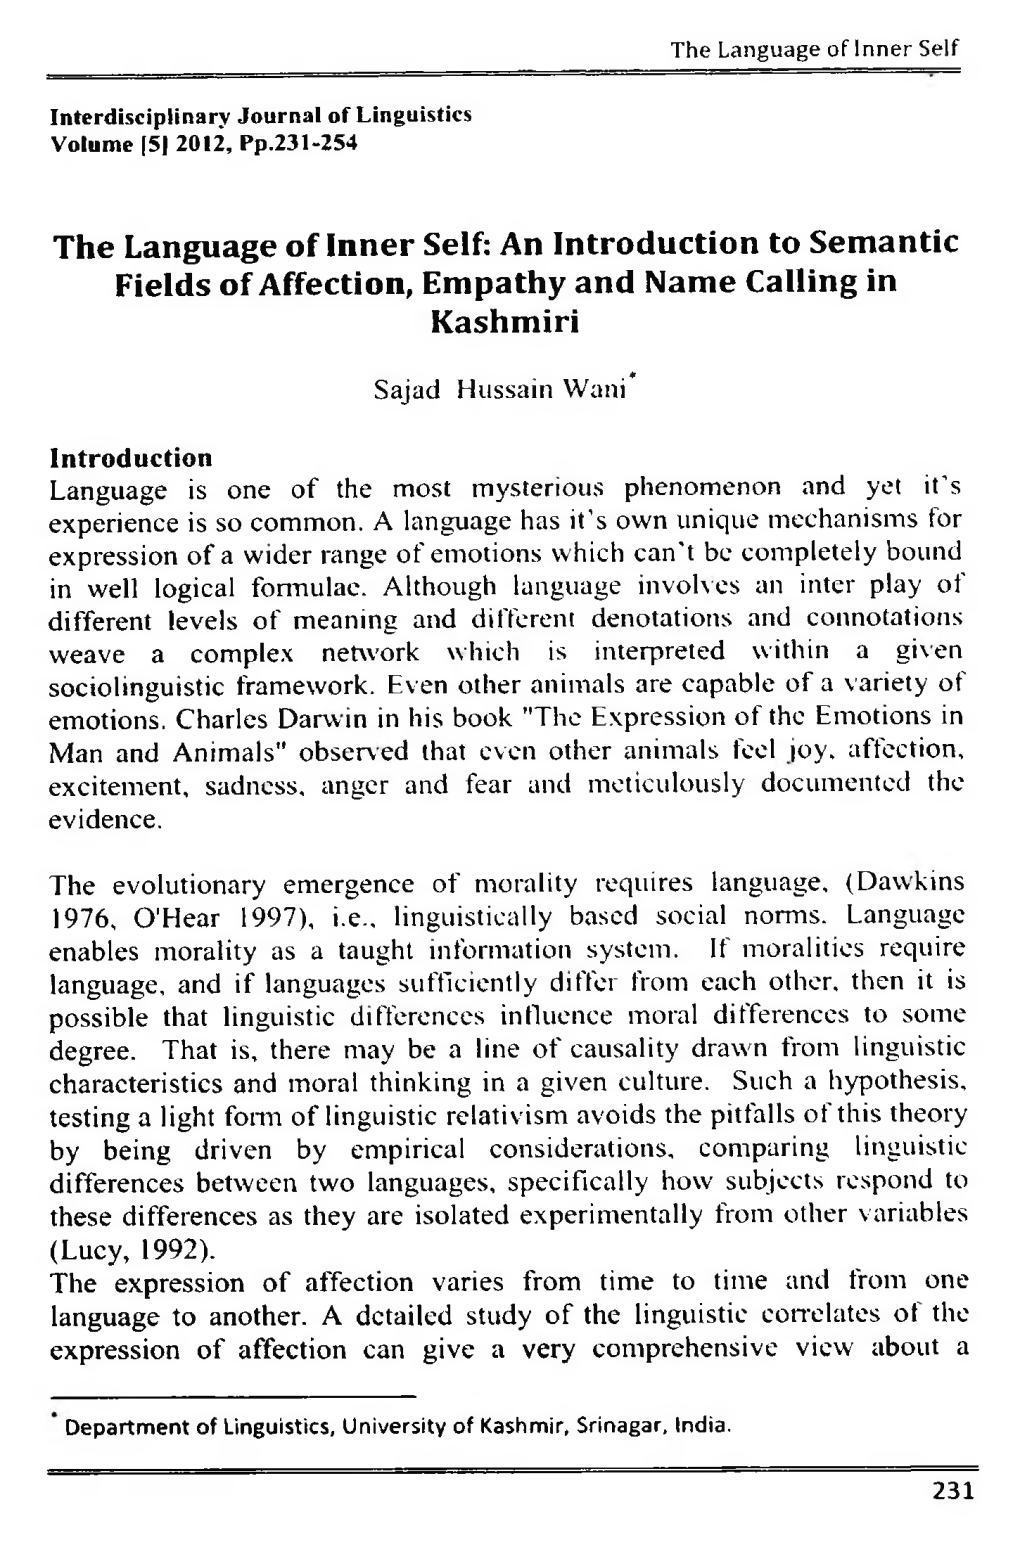 An Introduction to Semantic Fields of Affection, Empathy and Name Calling in Kashmiri